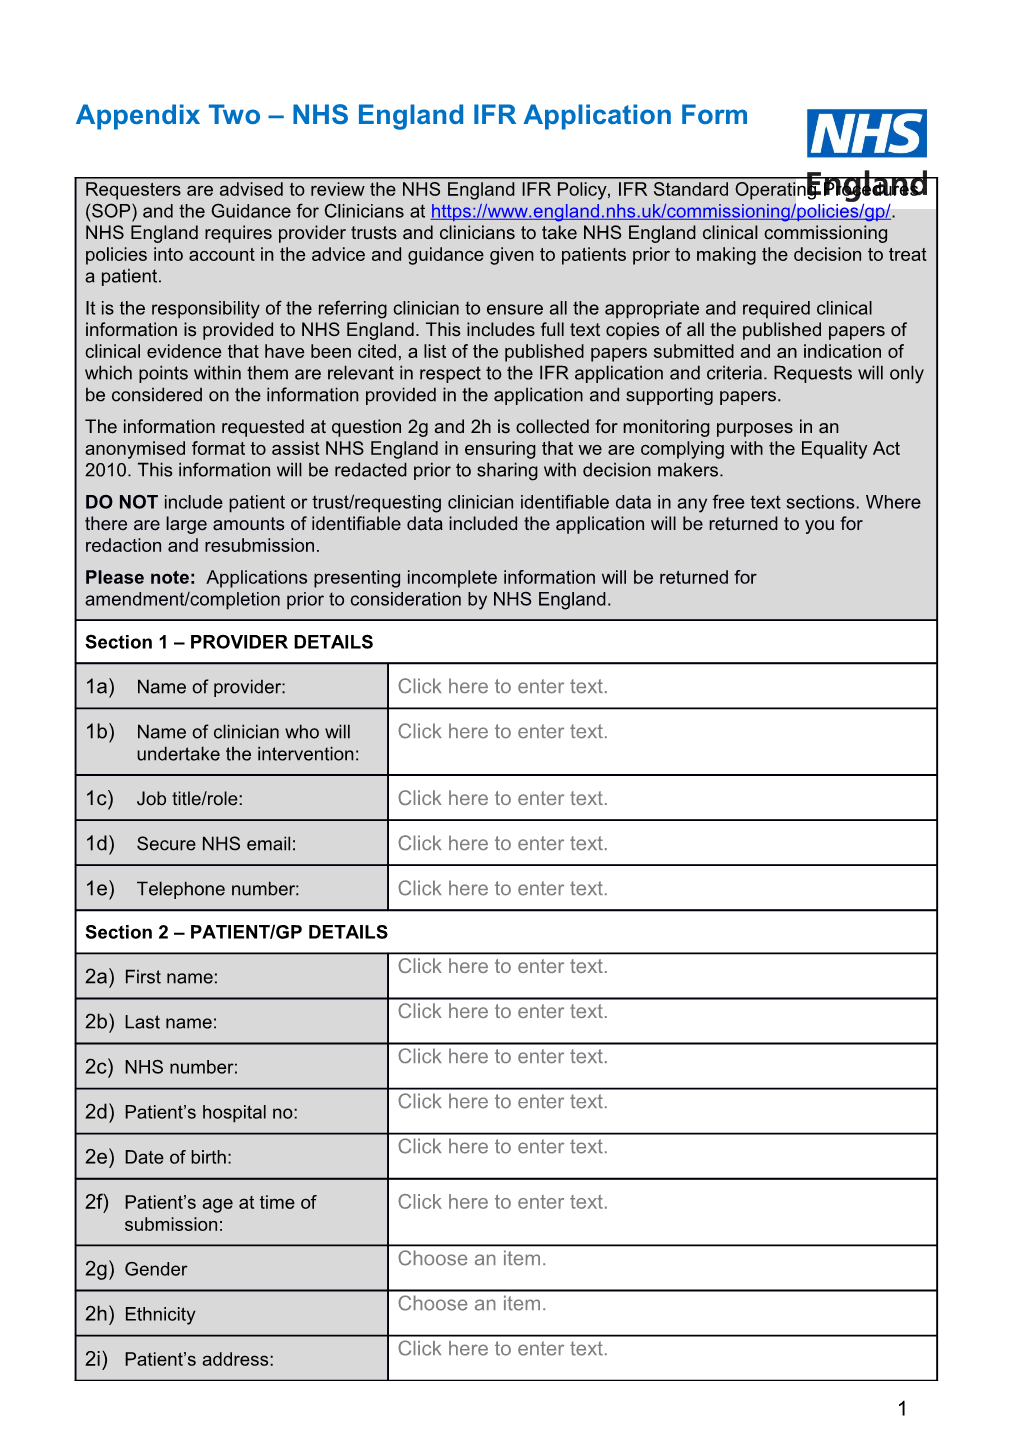 Appendix Two NHS England IFR Application Form